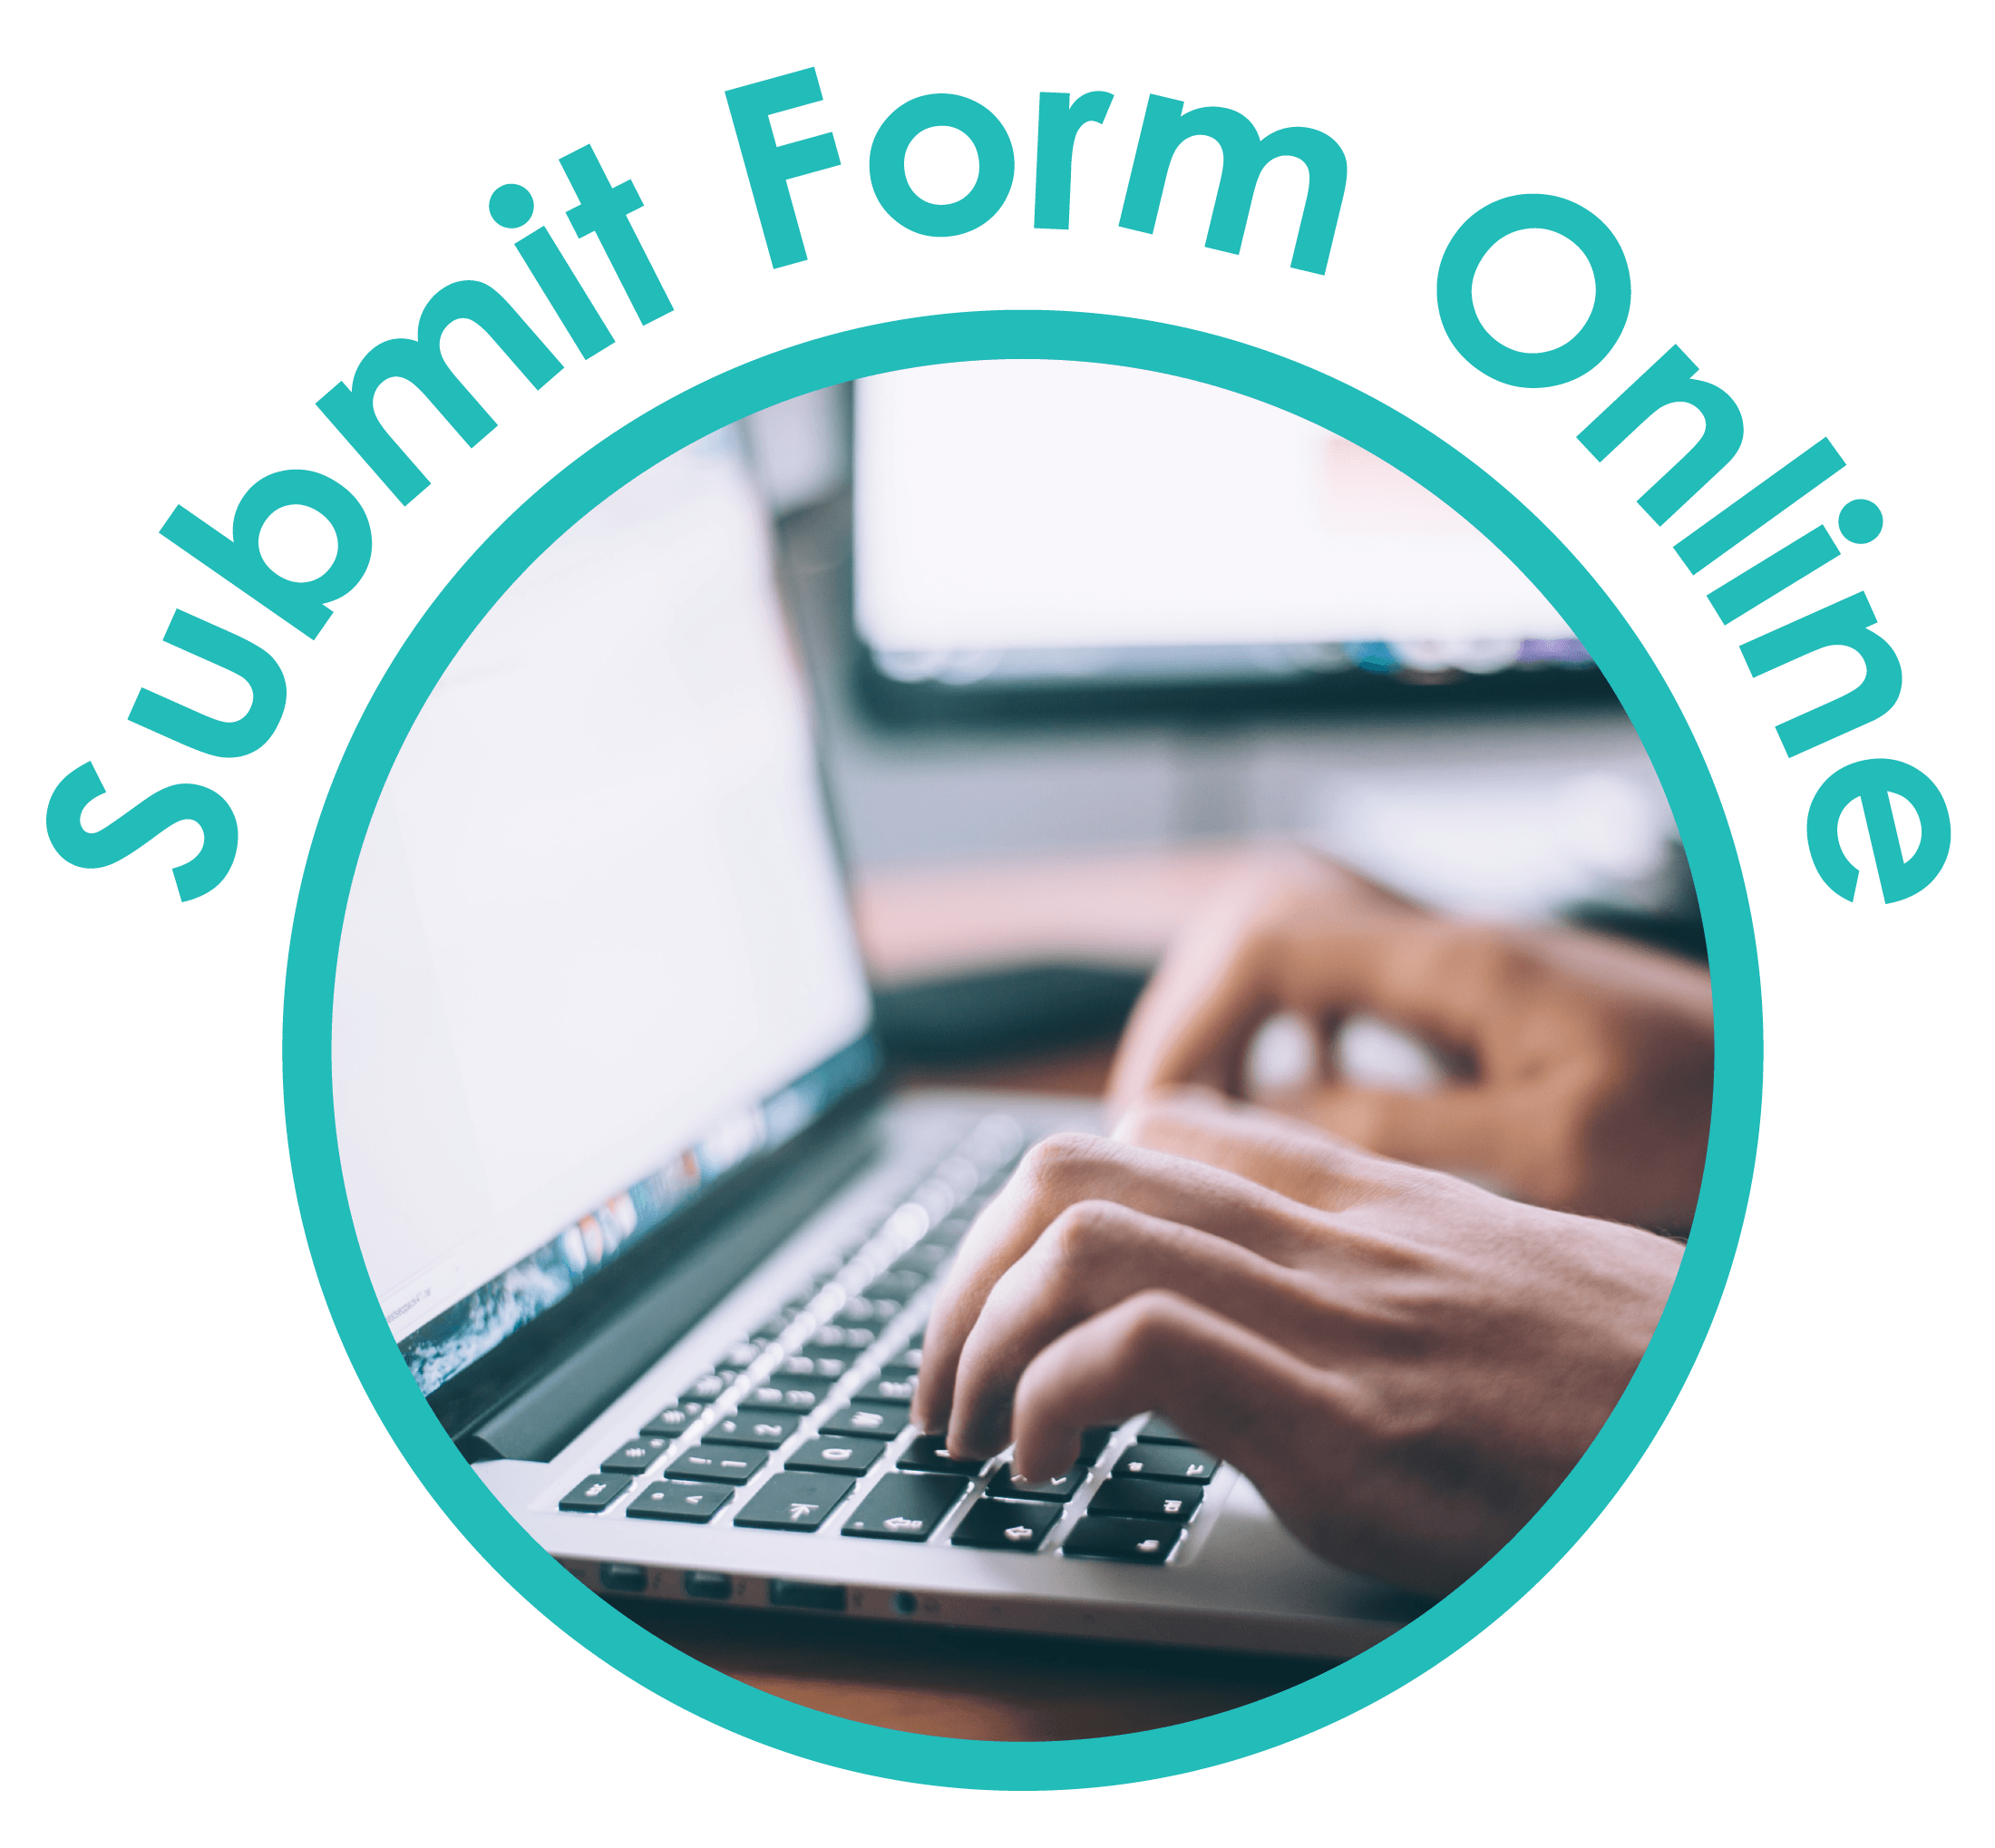 Clickable icon to submit form online Opens in new window